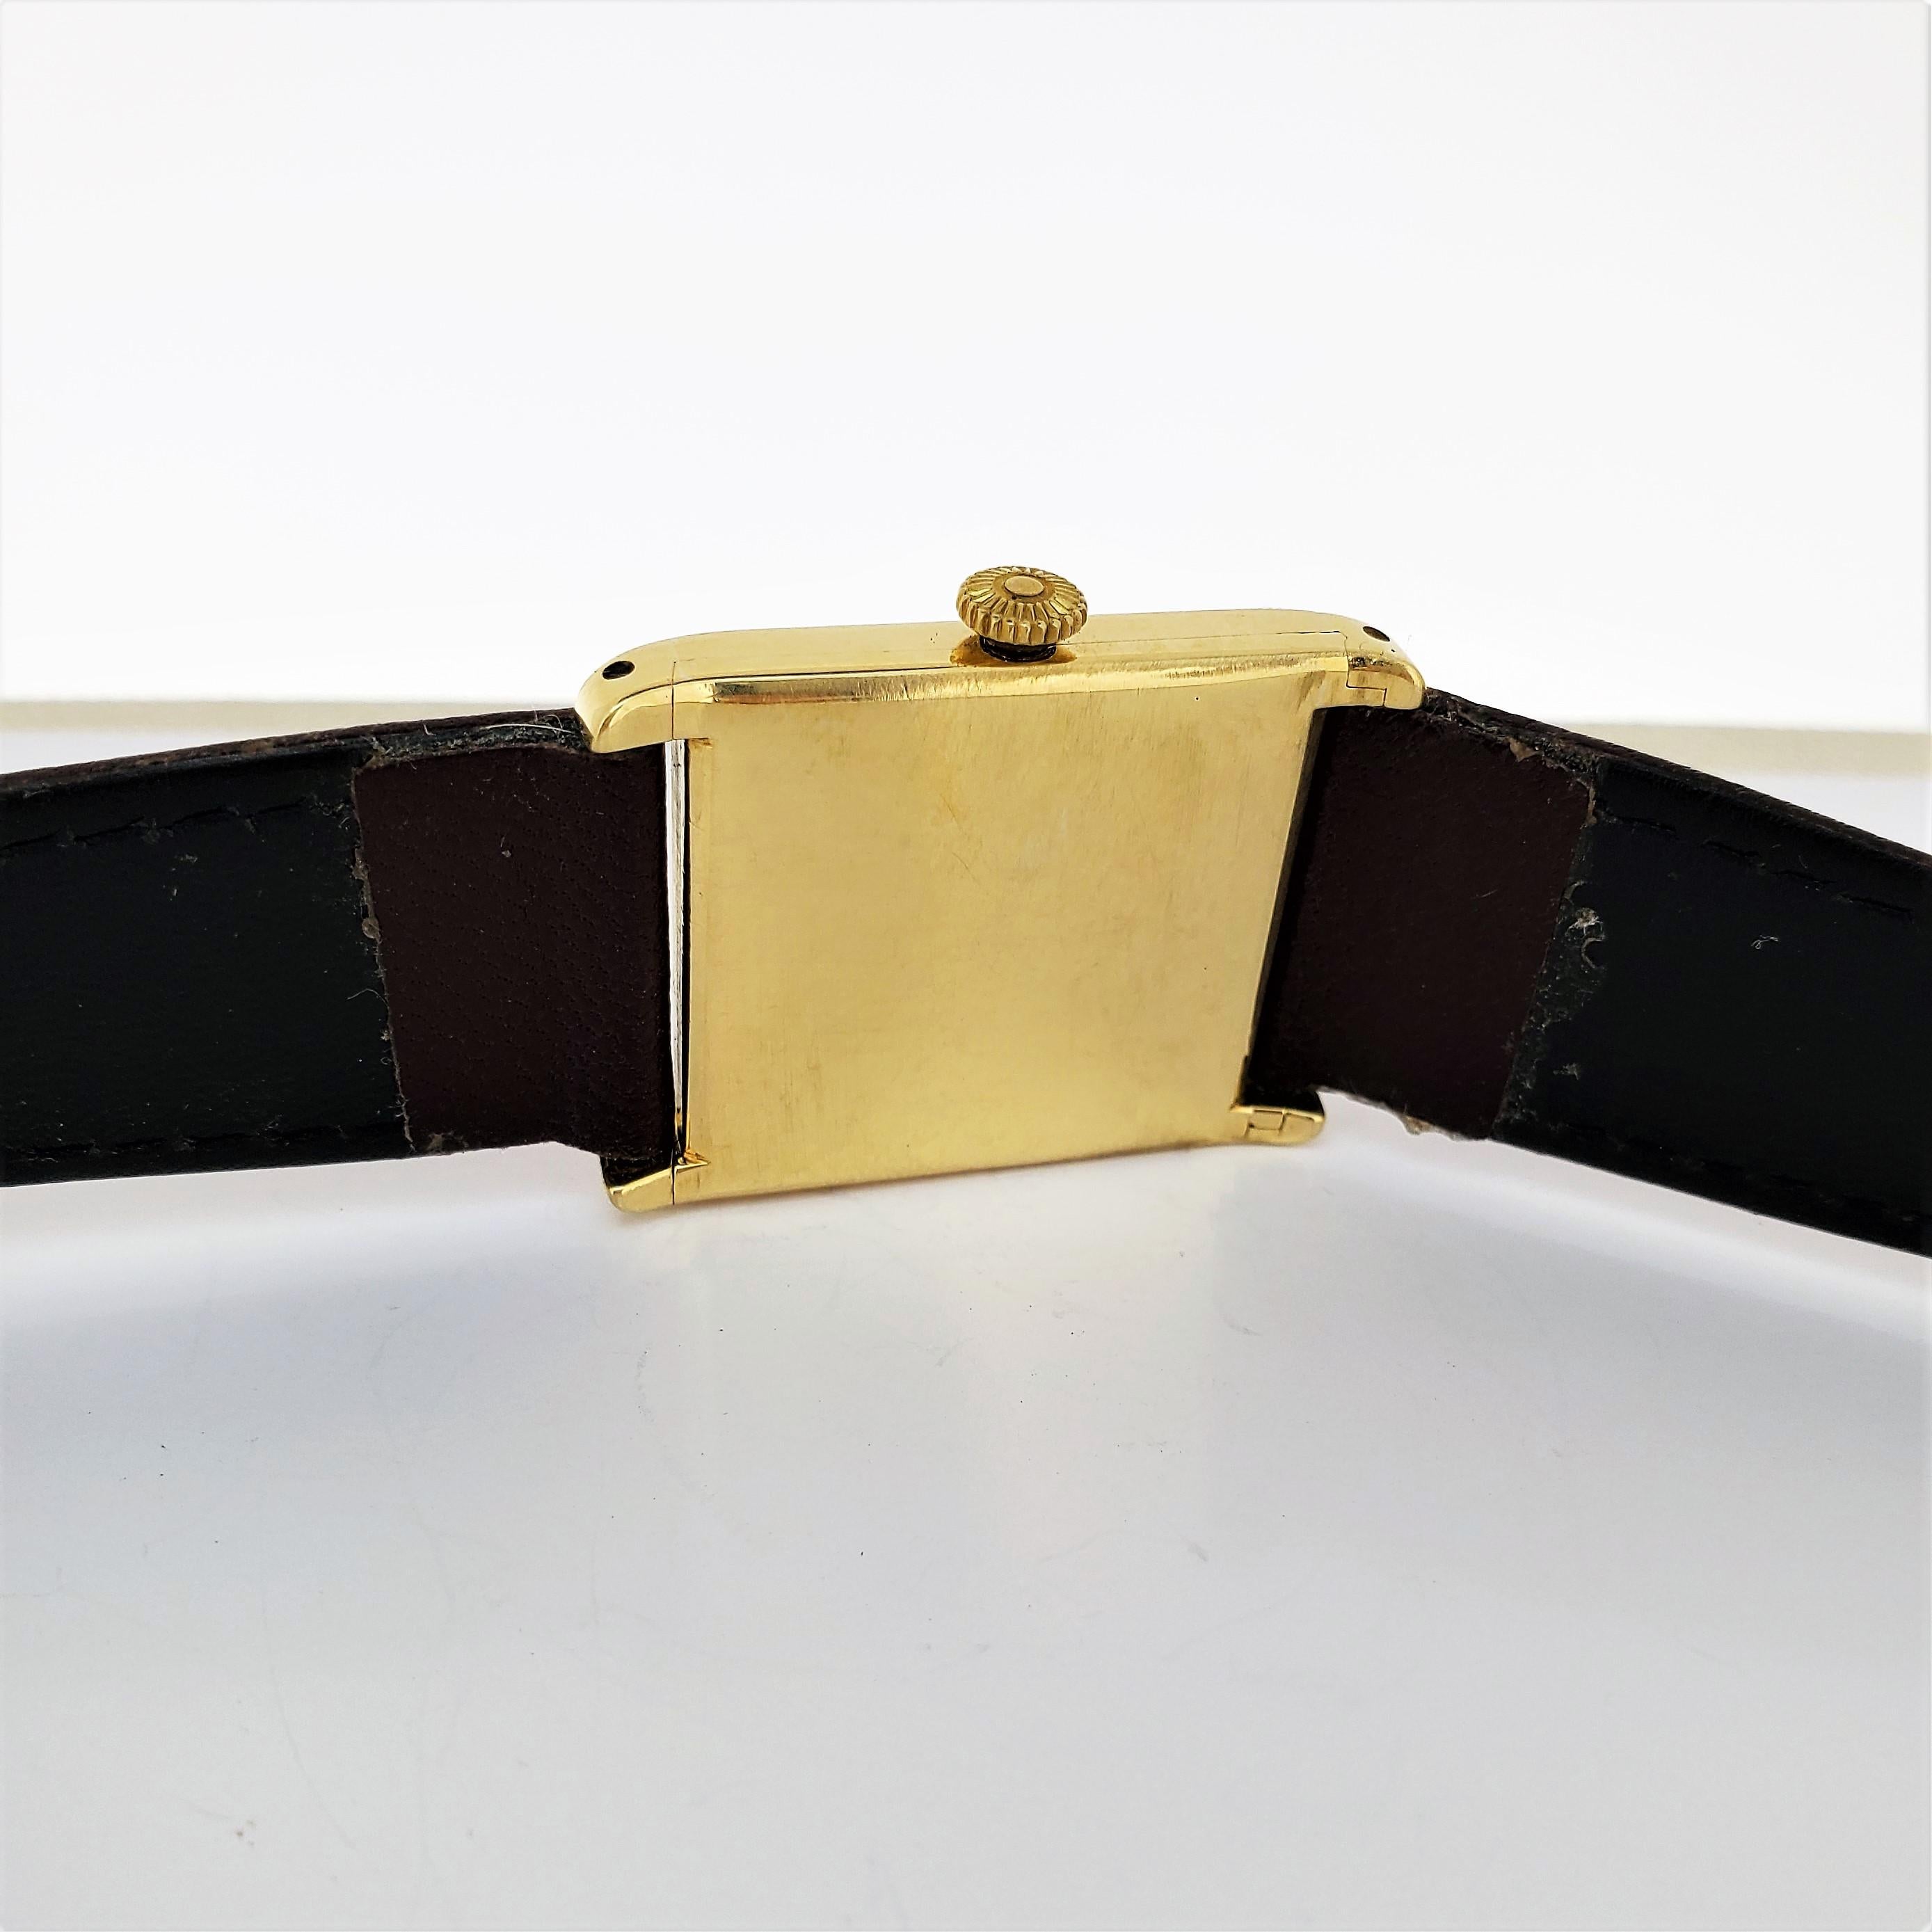 Patek Philippe Early Yellow Gold Art Deco Square Tank Watch, circa 1912 For Sale 3